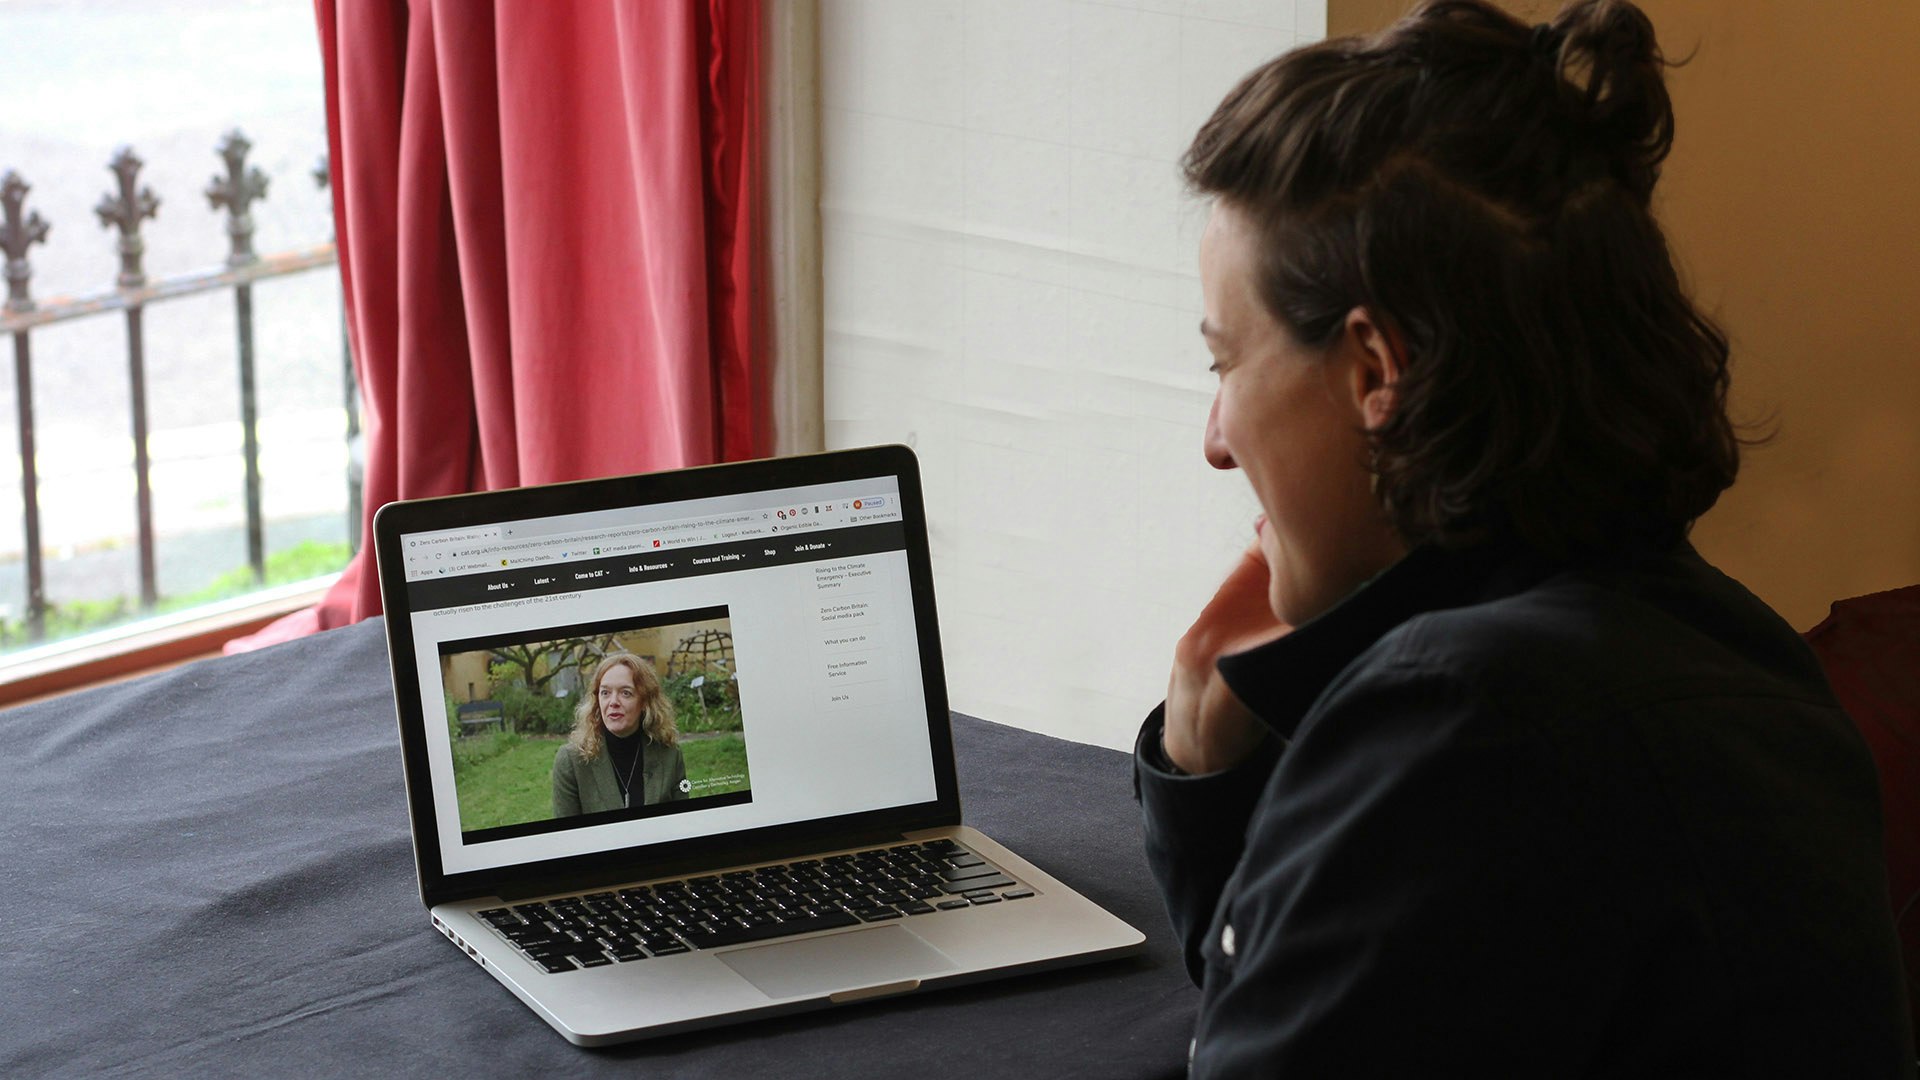 A Woman watches a video about CAT on a laptop